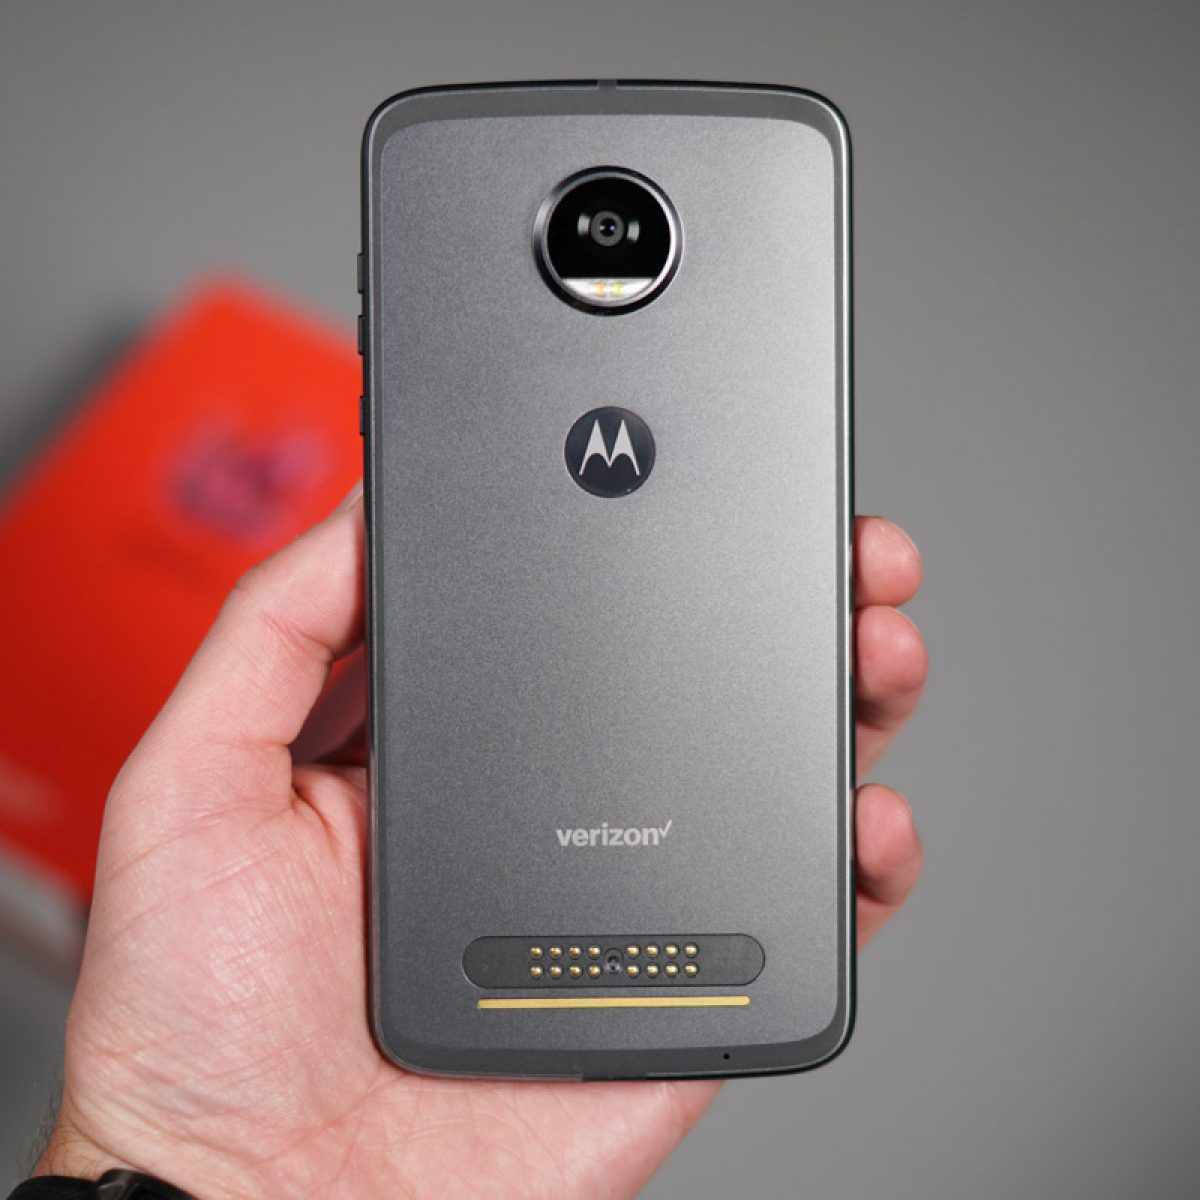 Moto Z Droid is now $119.77 with installment plan, Moto G4 Play